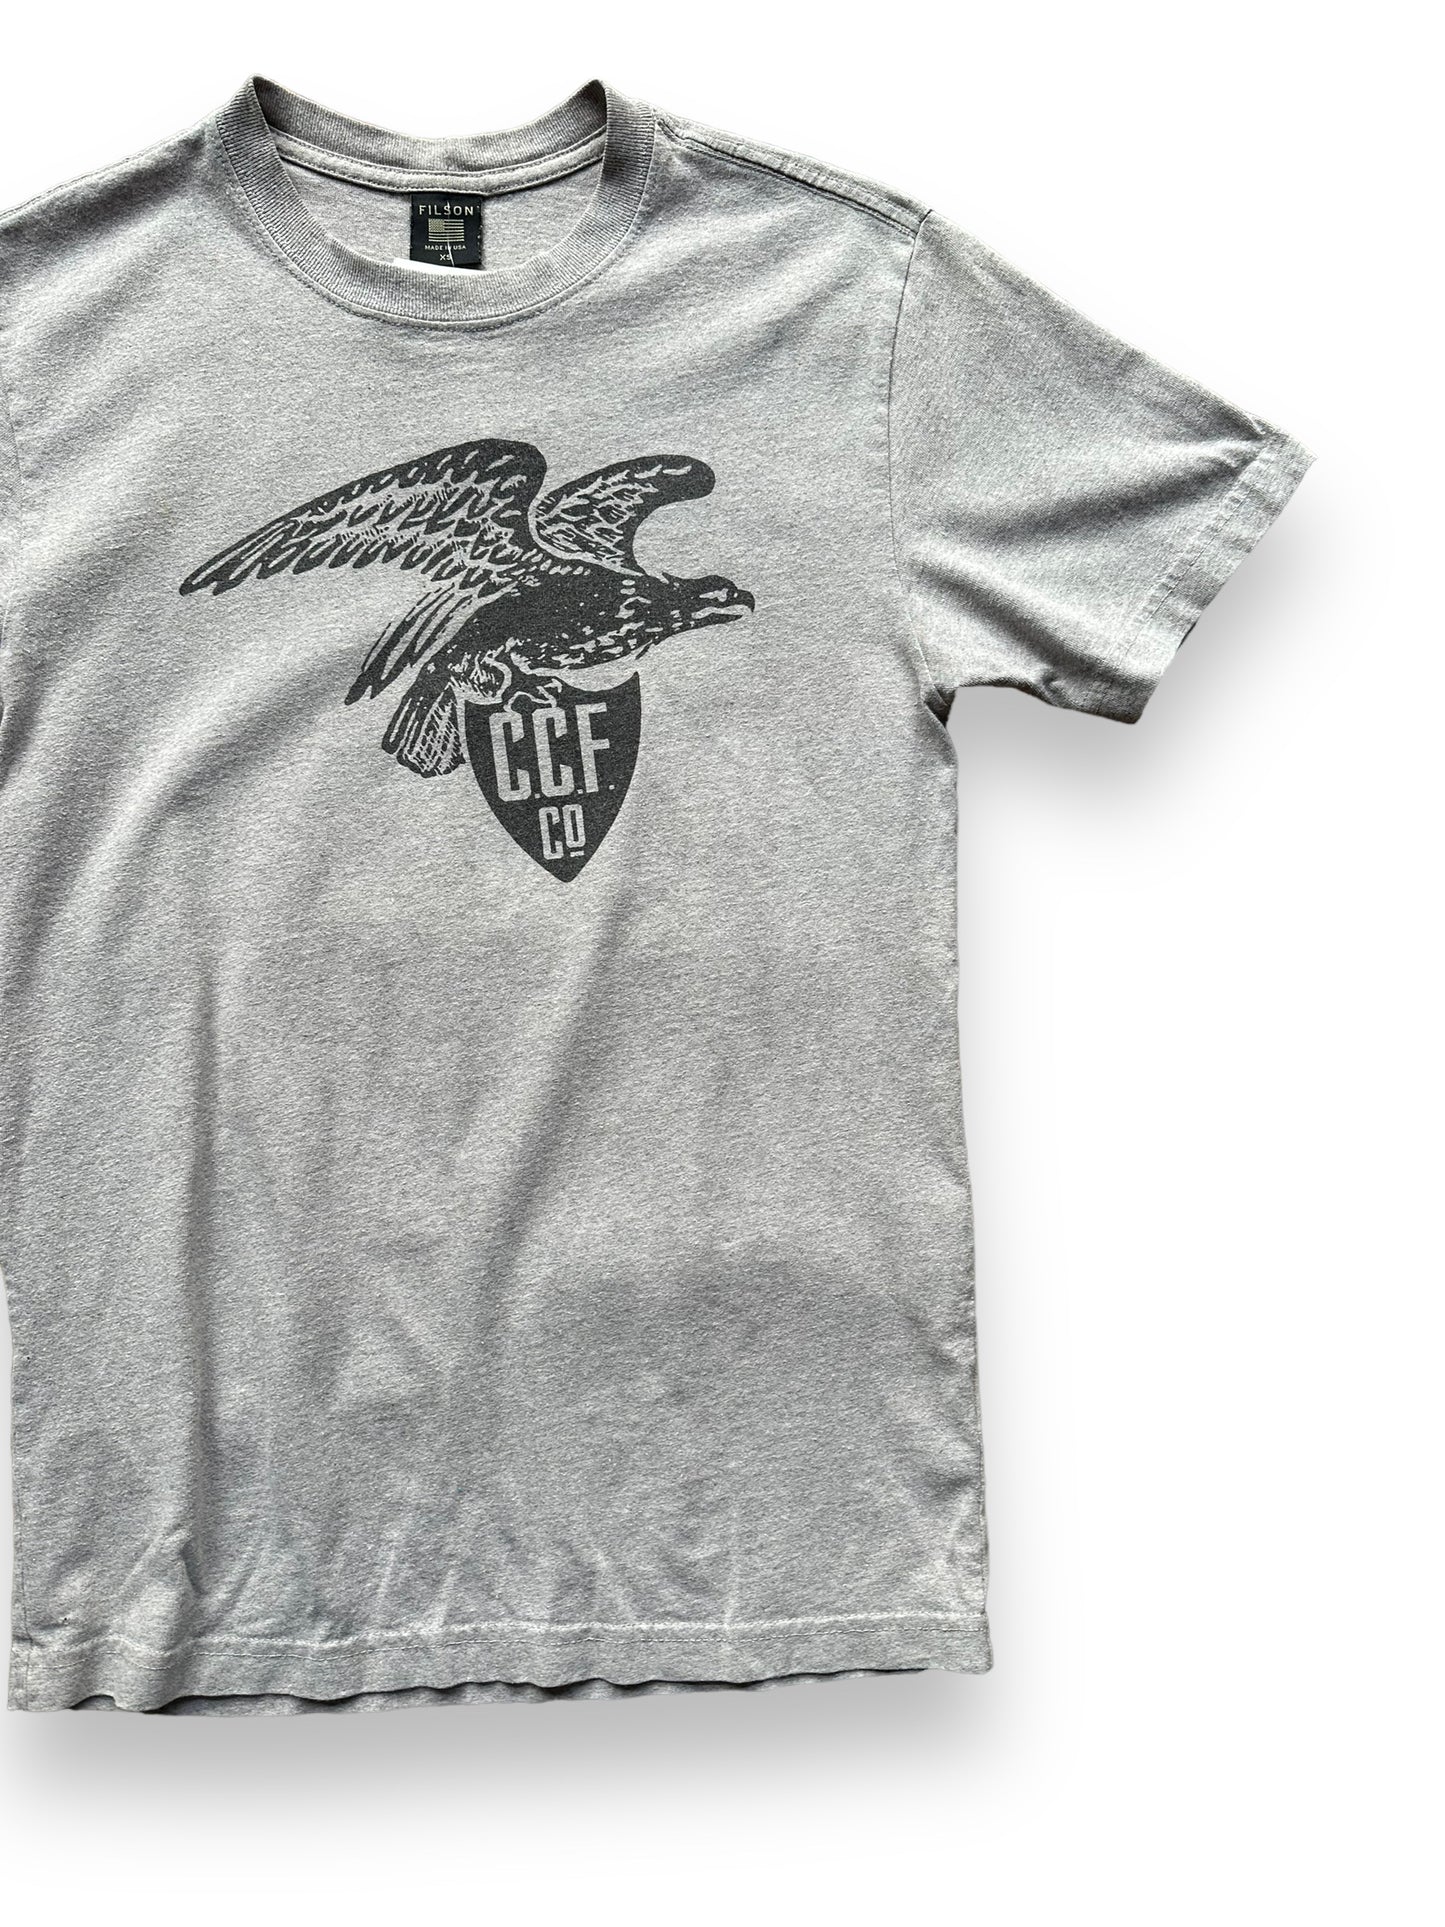 Front Left View of Grey Filson Eagle Graphic Tee SZ XS |  Barn Owl Vintage Goods | Vintage Filson Workwear Seattle